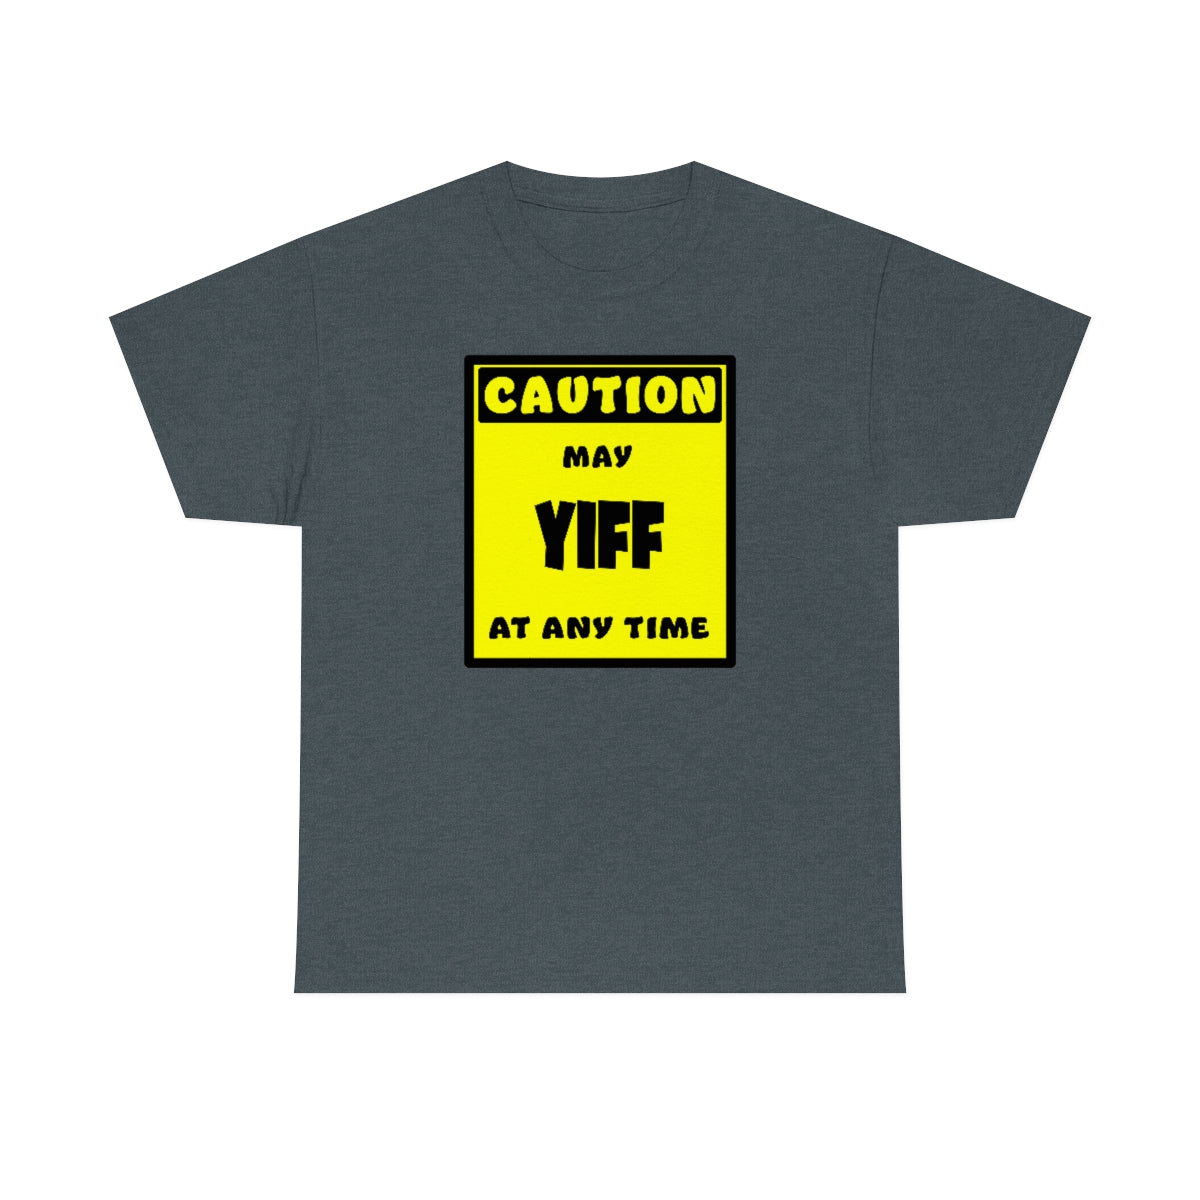 CAUTION! May YIFF at any time! - T-Shirt T-Shirt AFLT-Whootorca Dark Heather S 